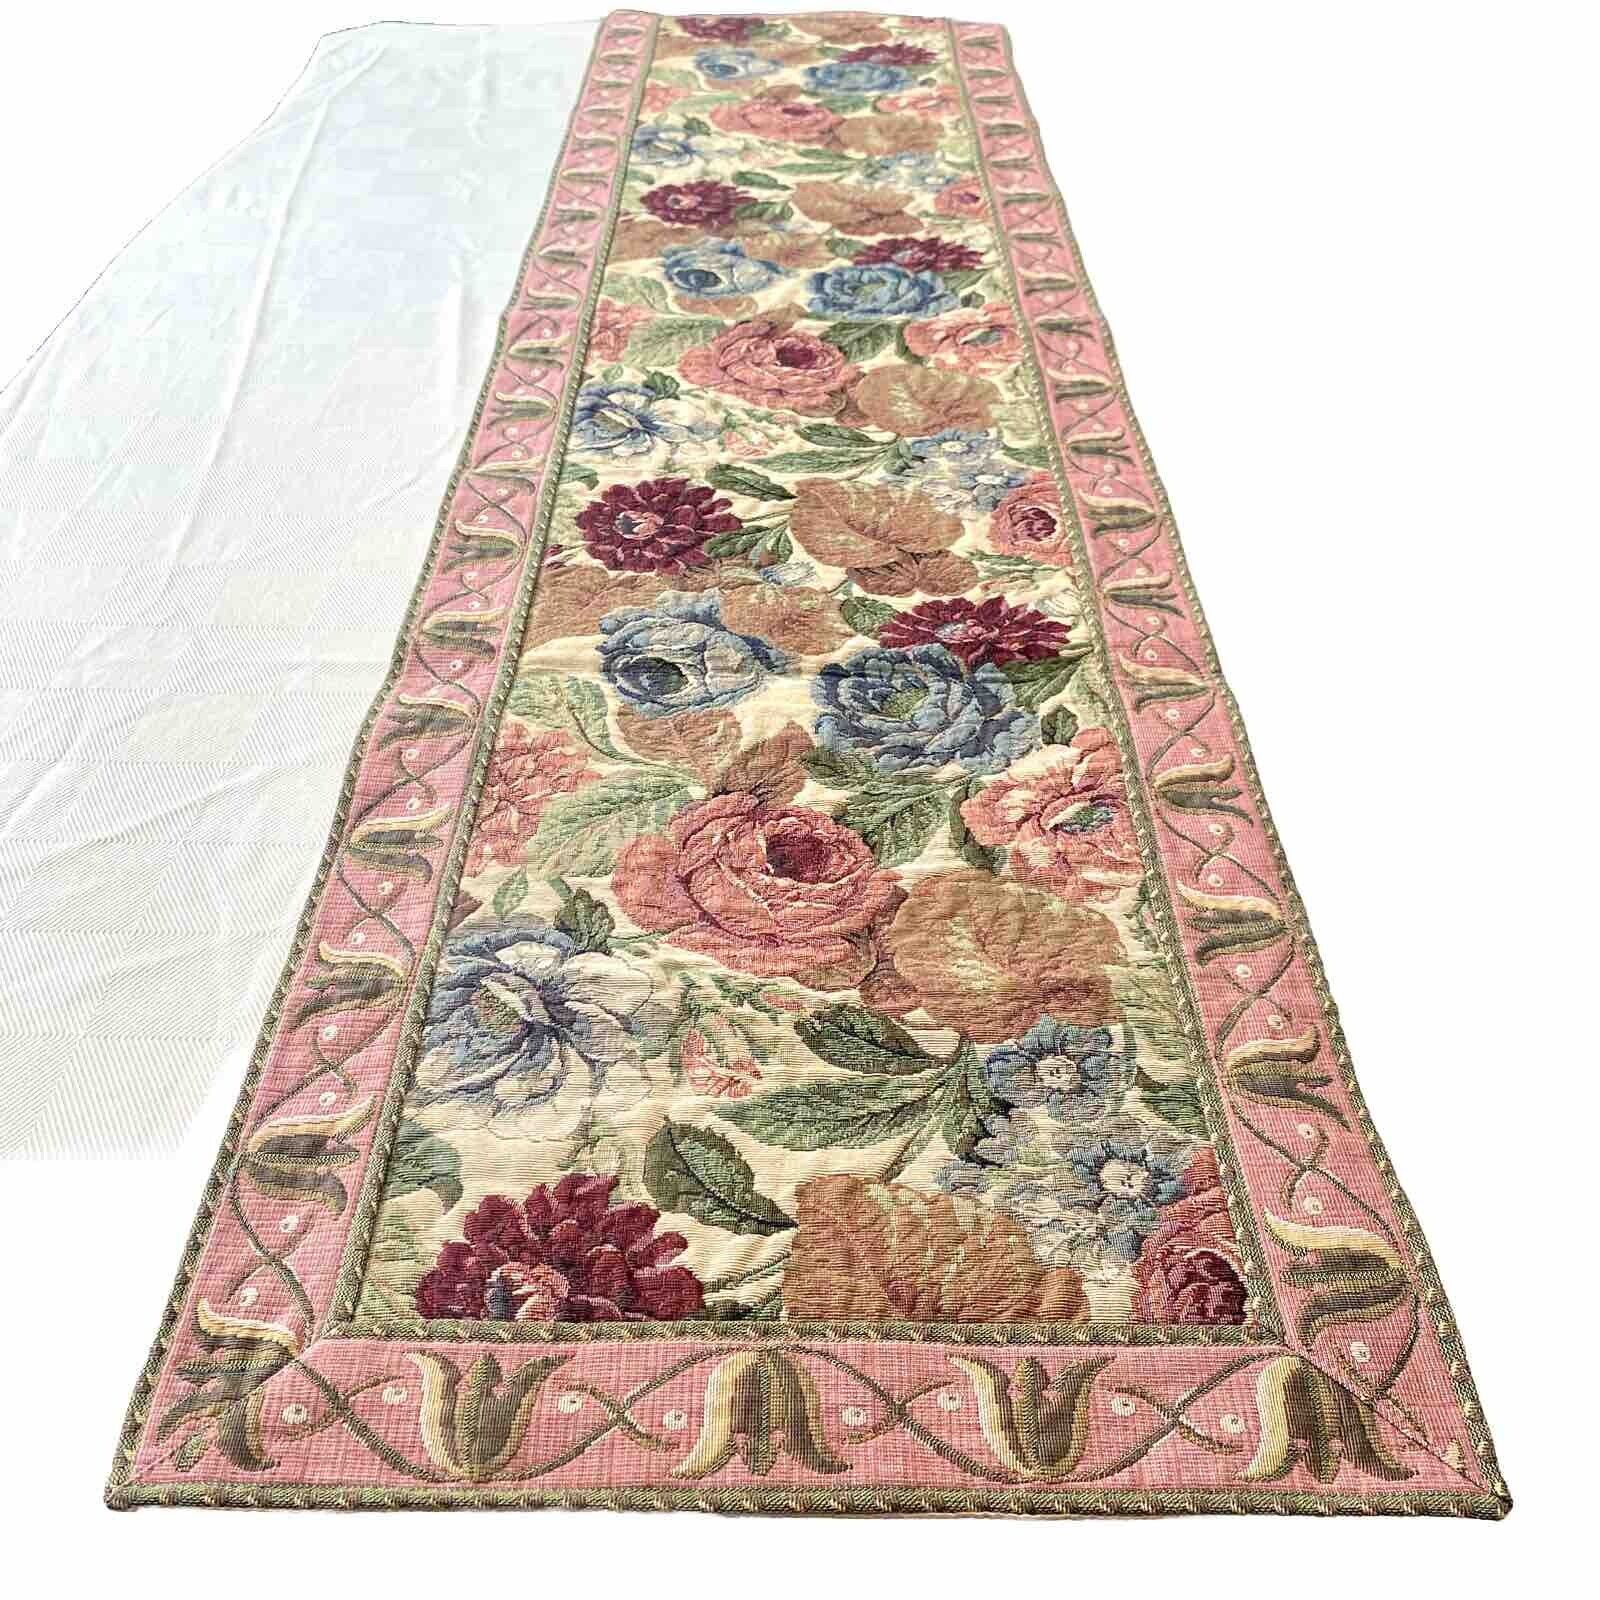 Vtg Tapestry By Renaissance Woven Art Table Runner Floral Spring Cotton Made USA